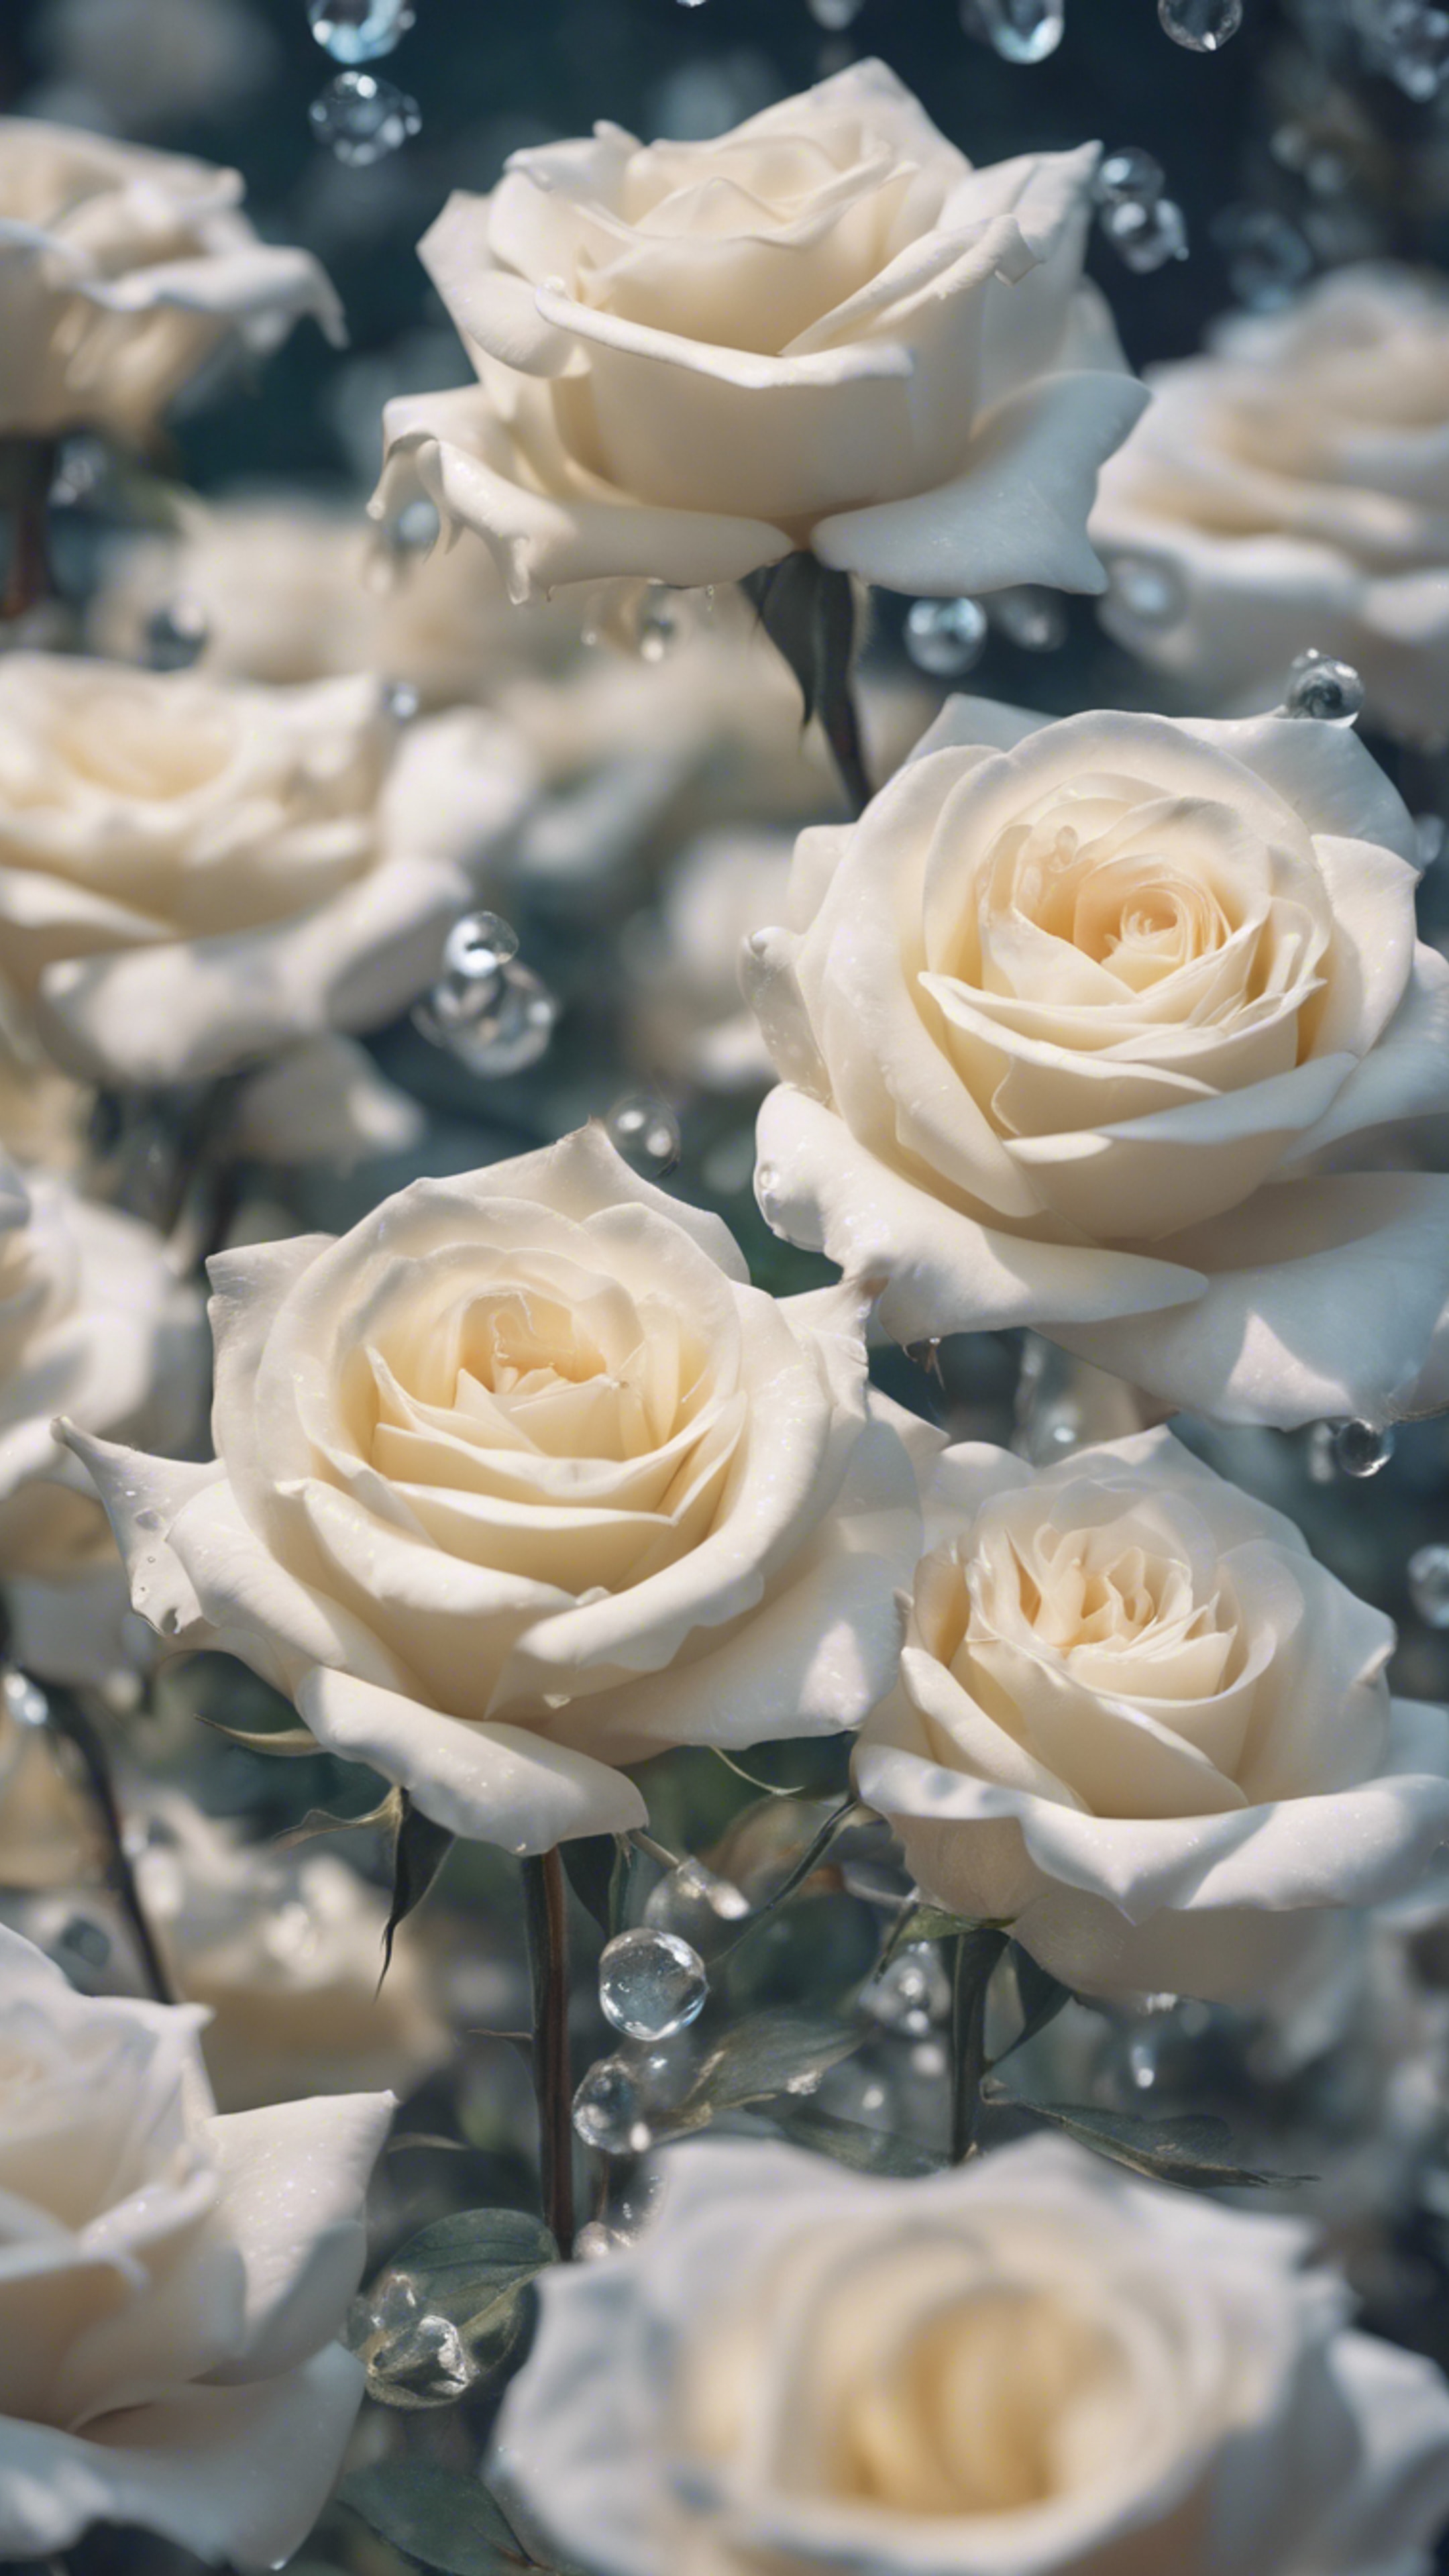 An abstract interpretation of white roses materialized within a vivid dreamscape, bathed in an ethereal light. Wallpaper[6a5484765abf4db78452]